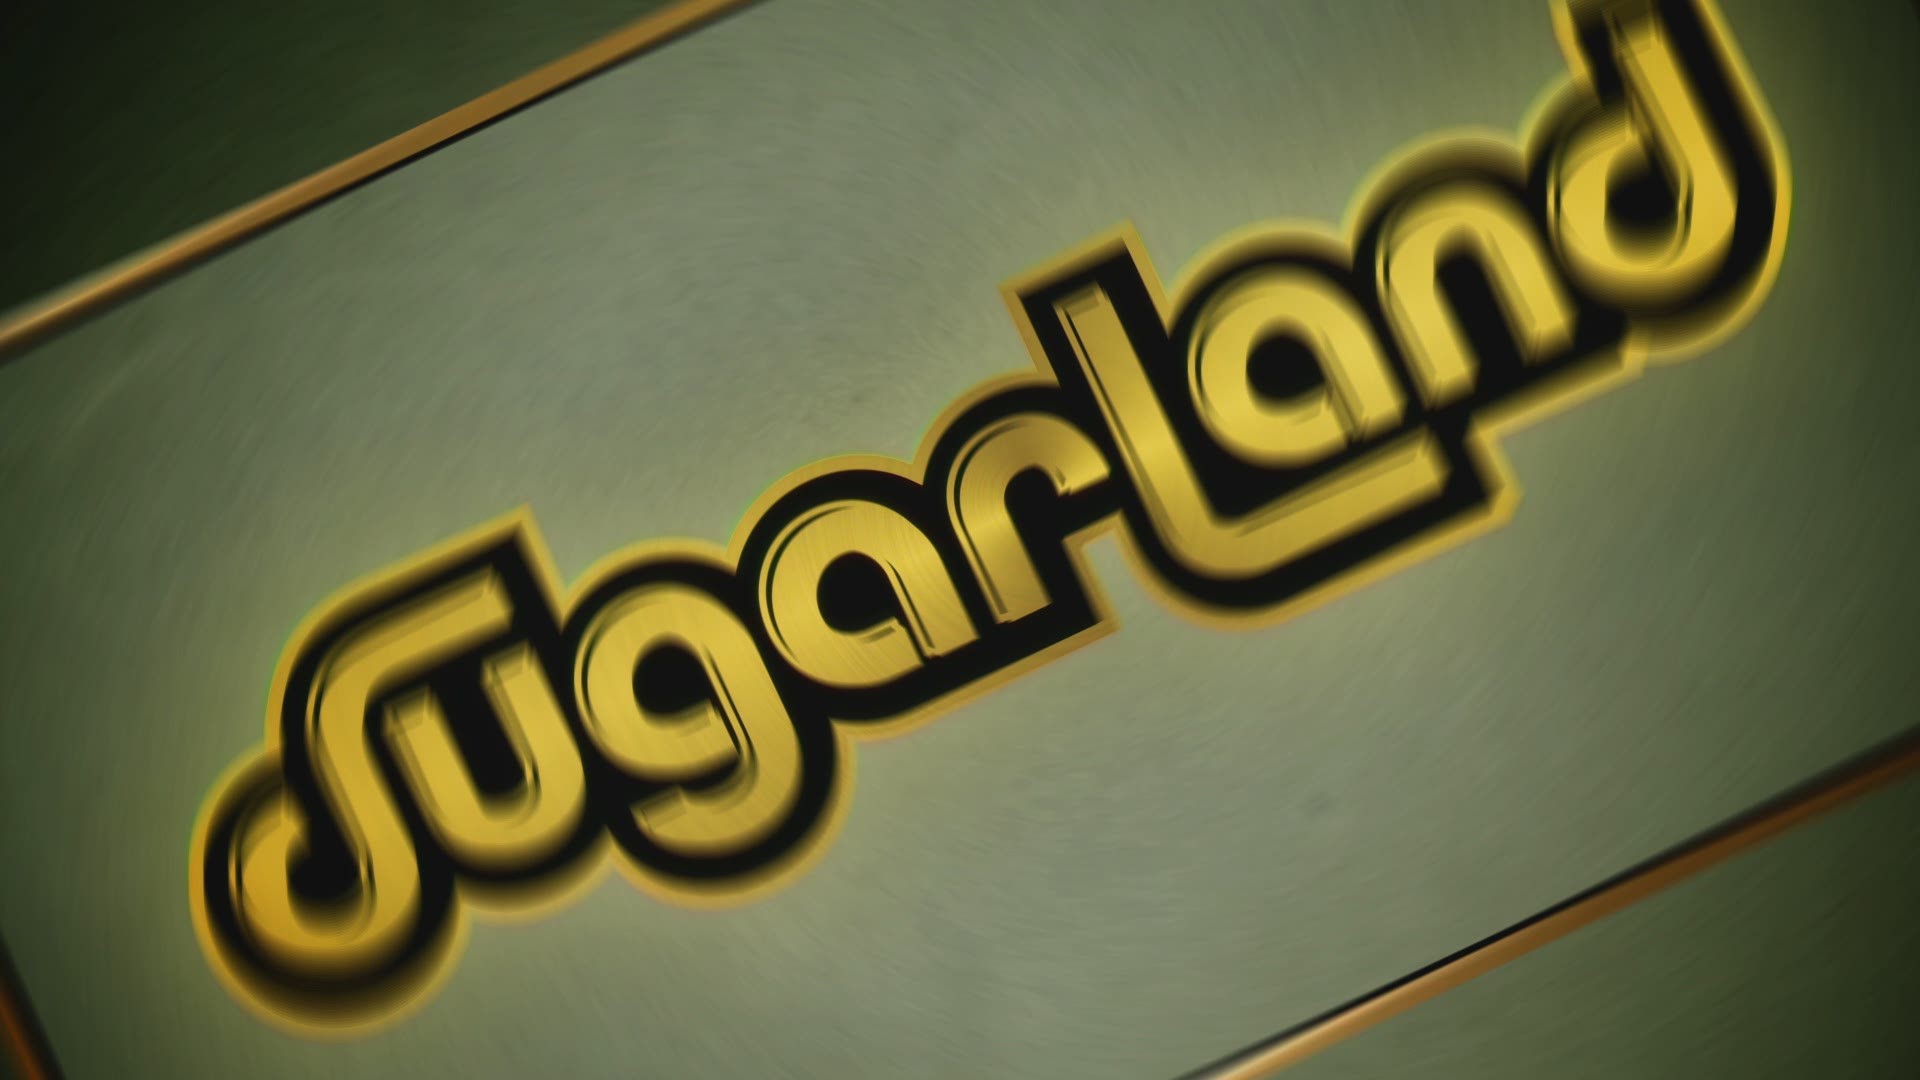 Enter to win tickets to see Sugarland!